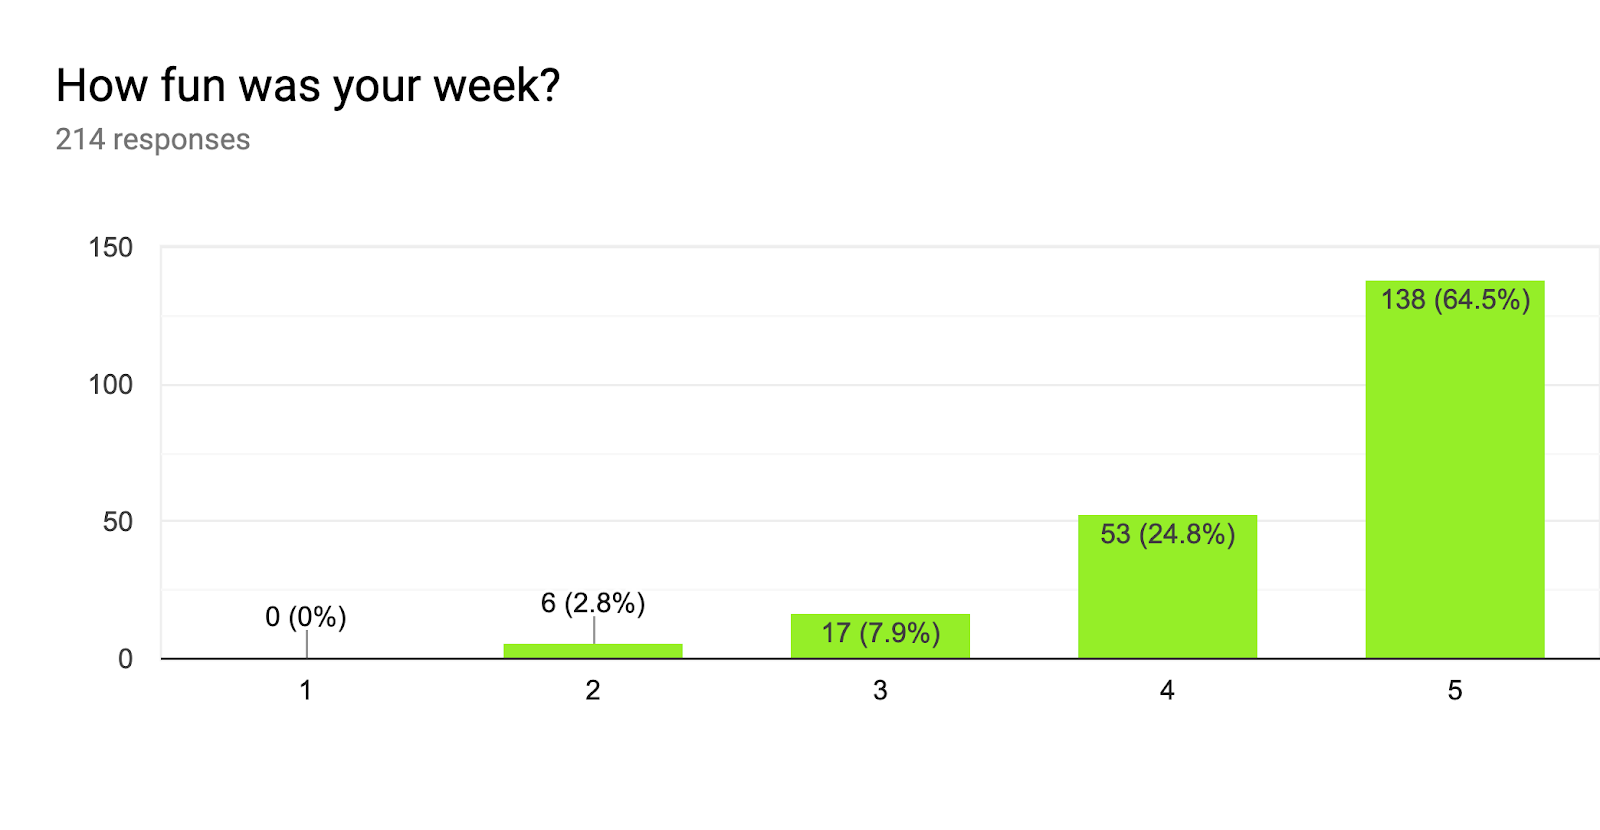 Forms response chart. Question title: How fun was your week?. Number of responses: 214 responses.